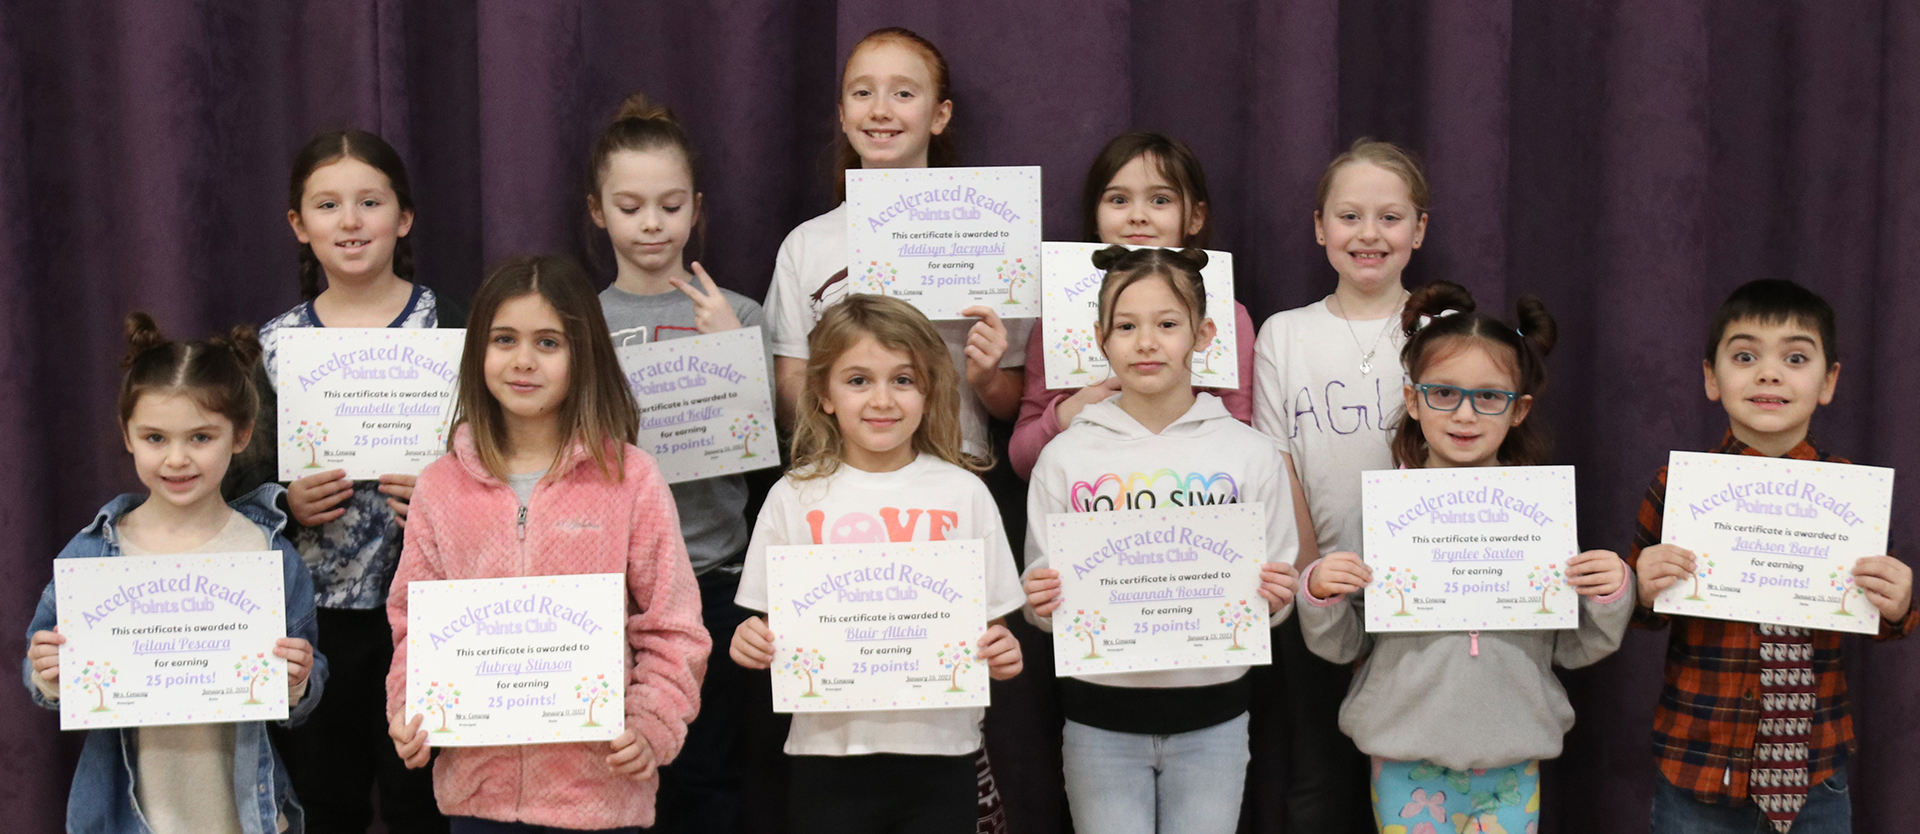 accelerated reader students pose with their certificates